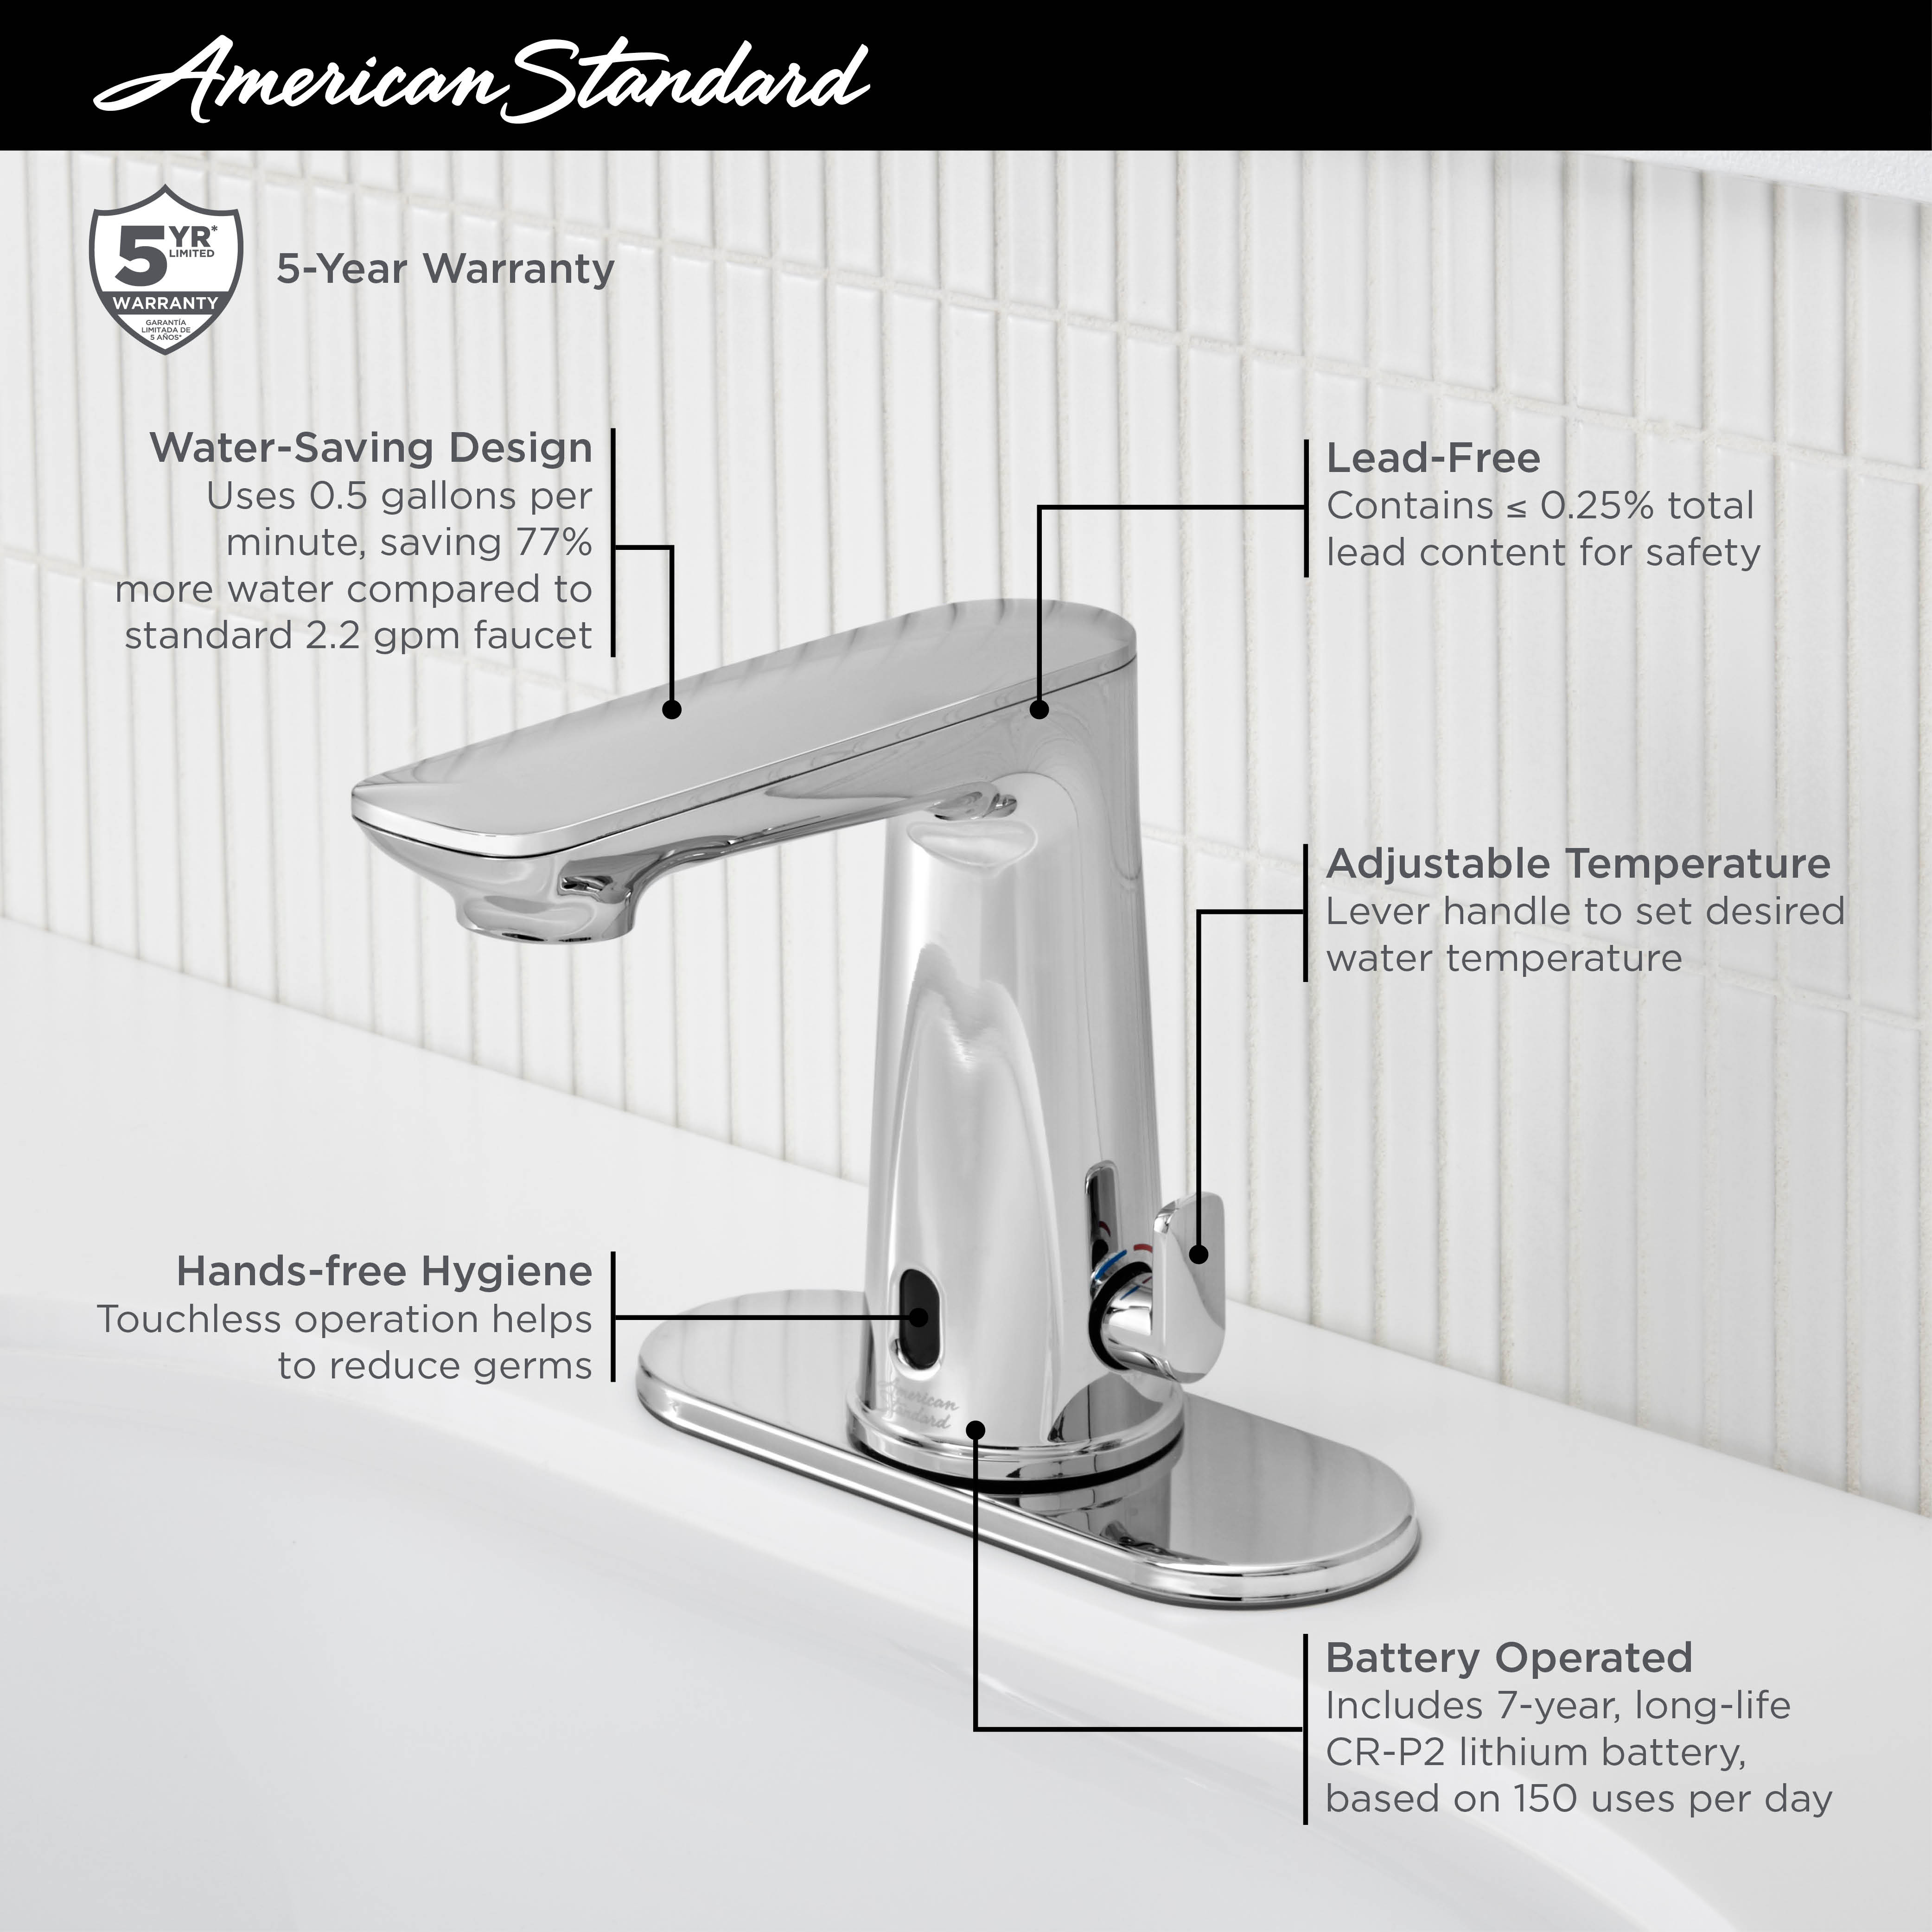 Clean IR Touchless Faucet, Battery-Powered with Above-Deck Mixing, 0.5 gpm/1.9 Lpm